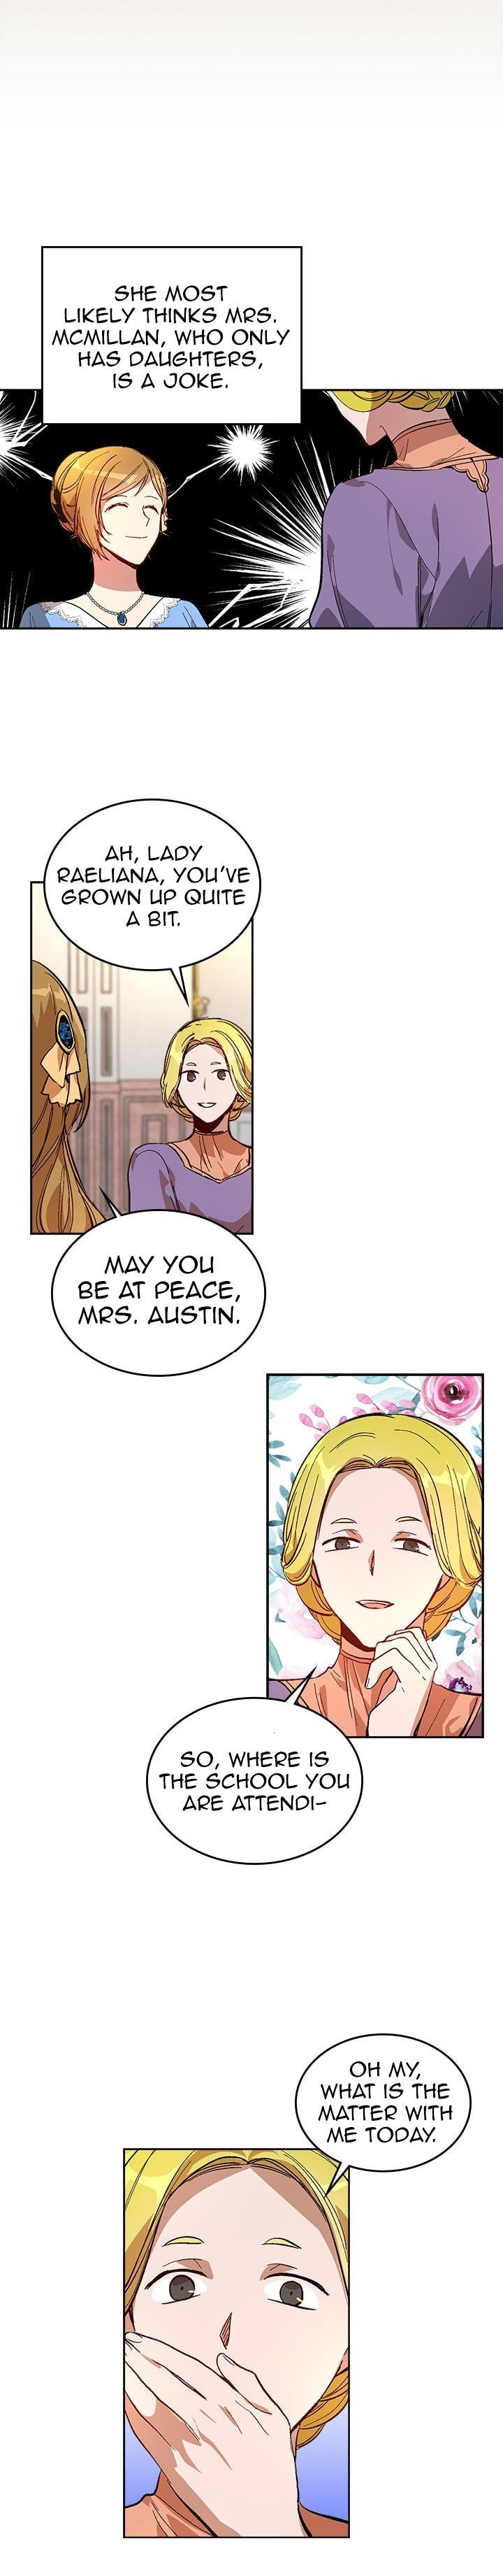 The Reason Why Raeliana Ended up at the Duke’s Mansion Chapter 81 - Page 4